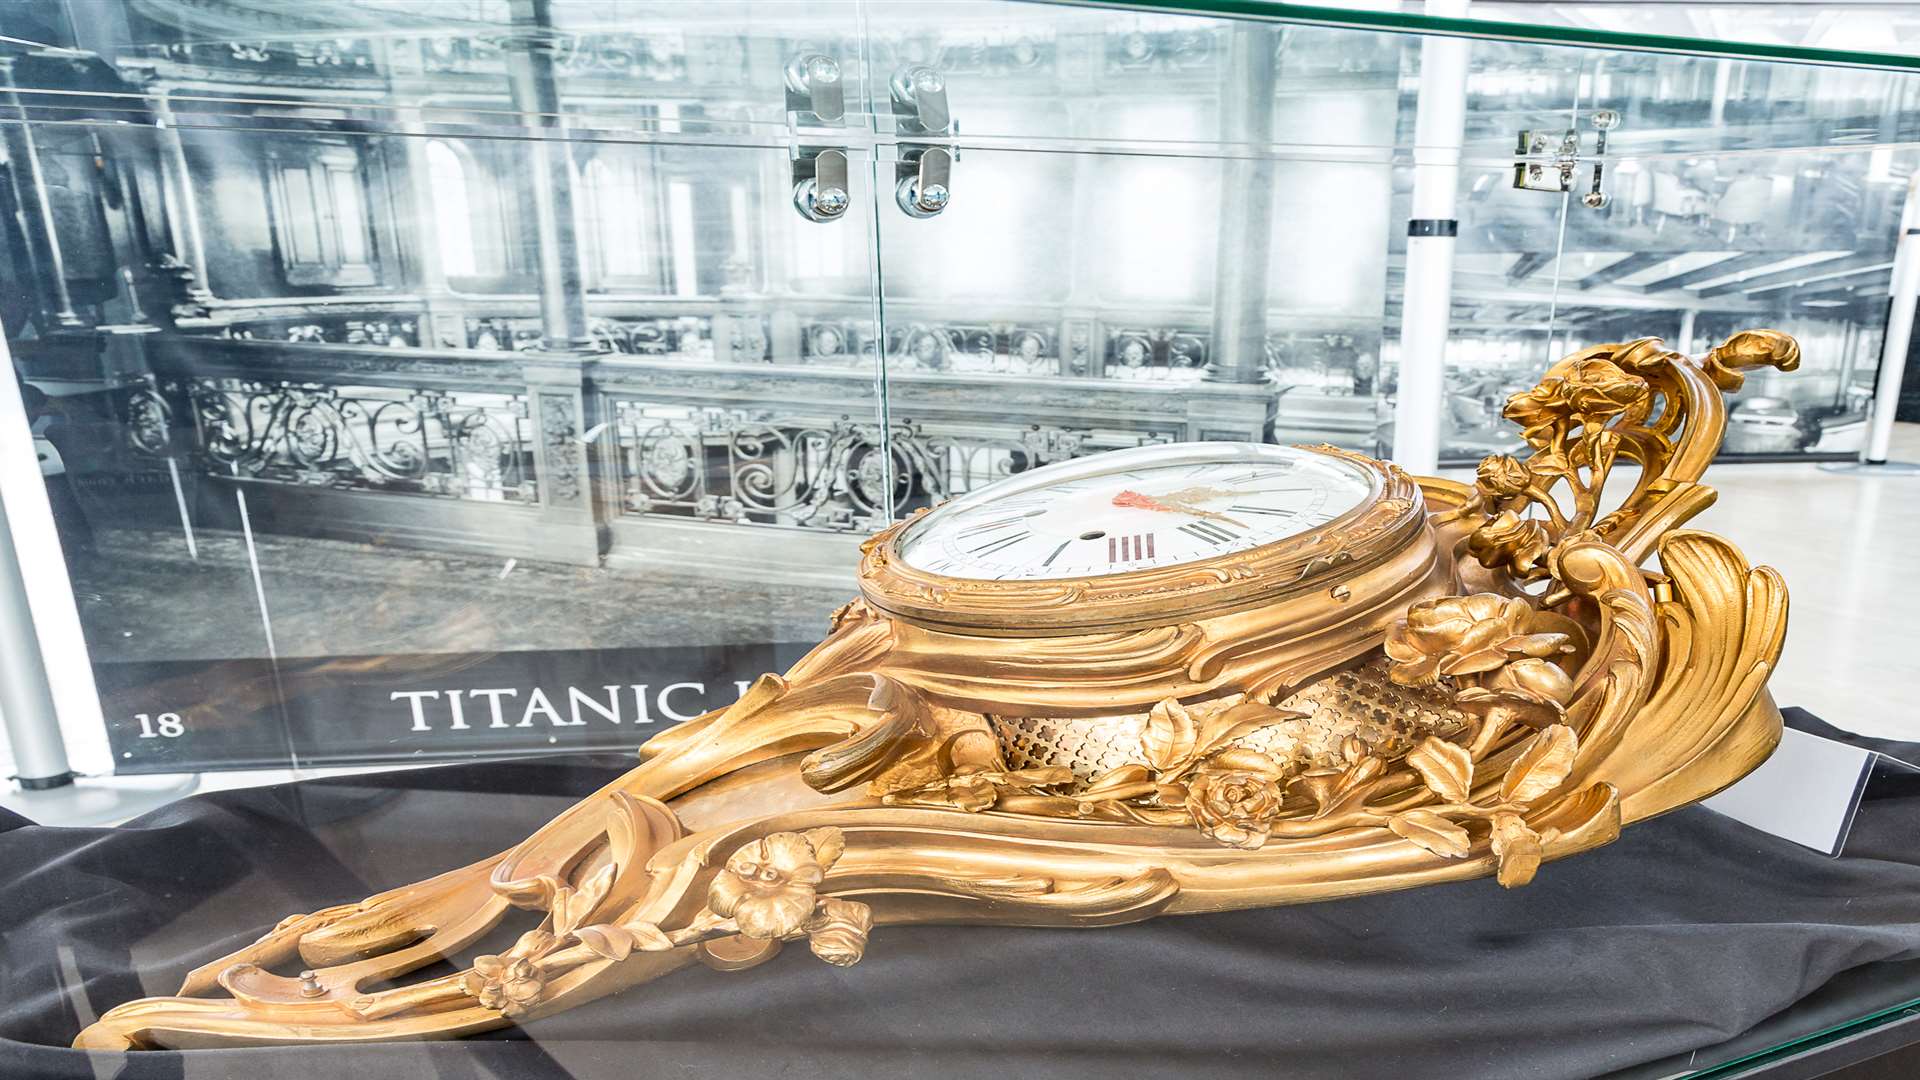 An ornate clock, identical to the one on board the Titanic